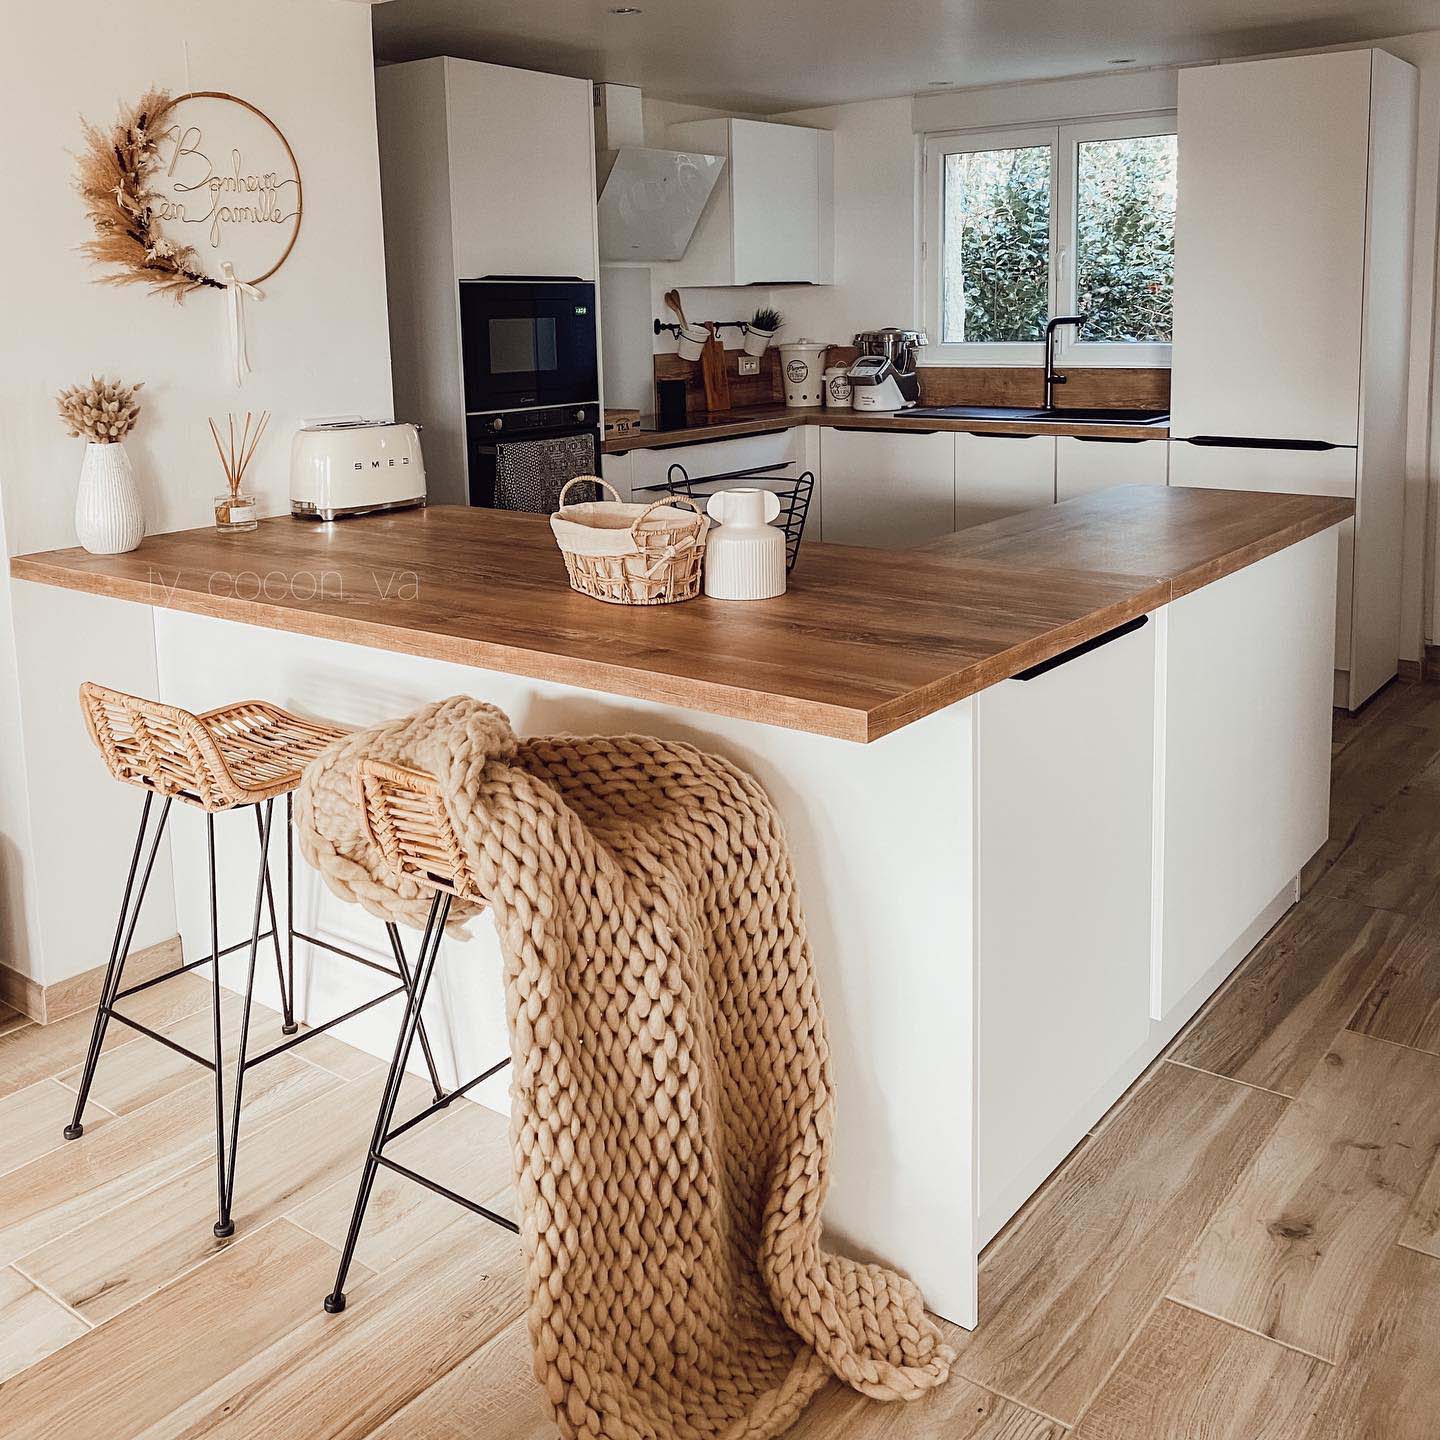 Renovated kitchen with coastal items and vidaXL chairs